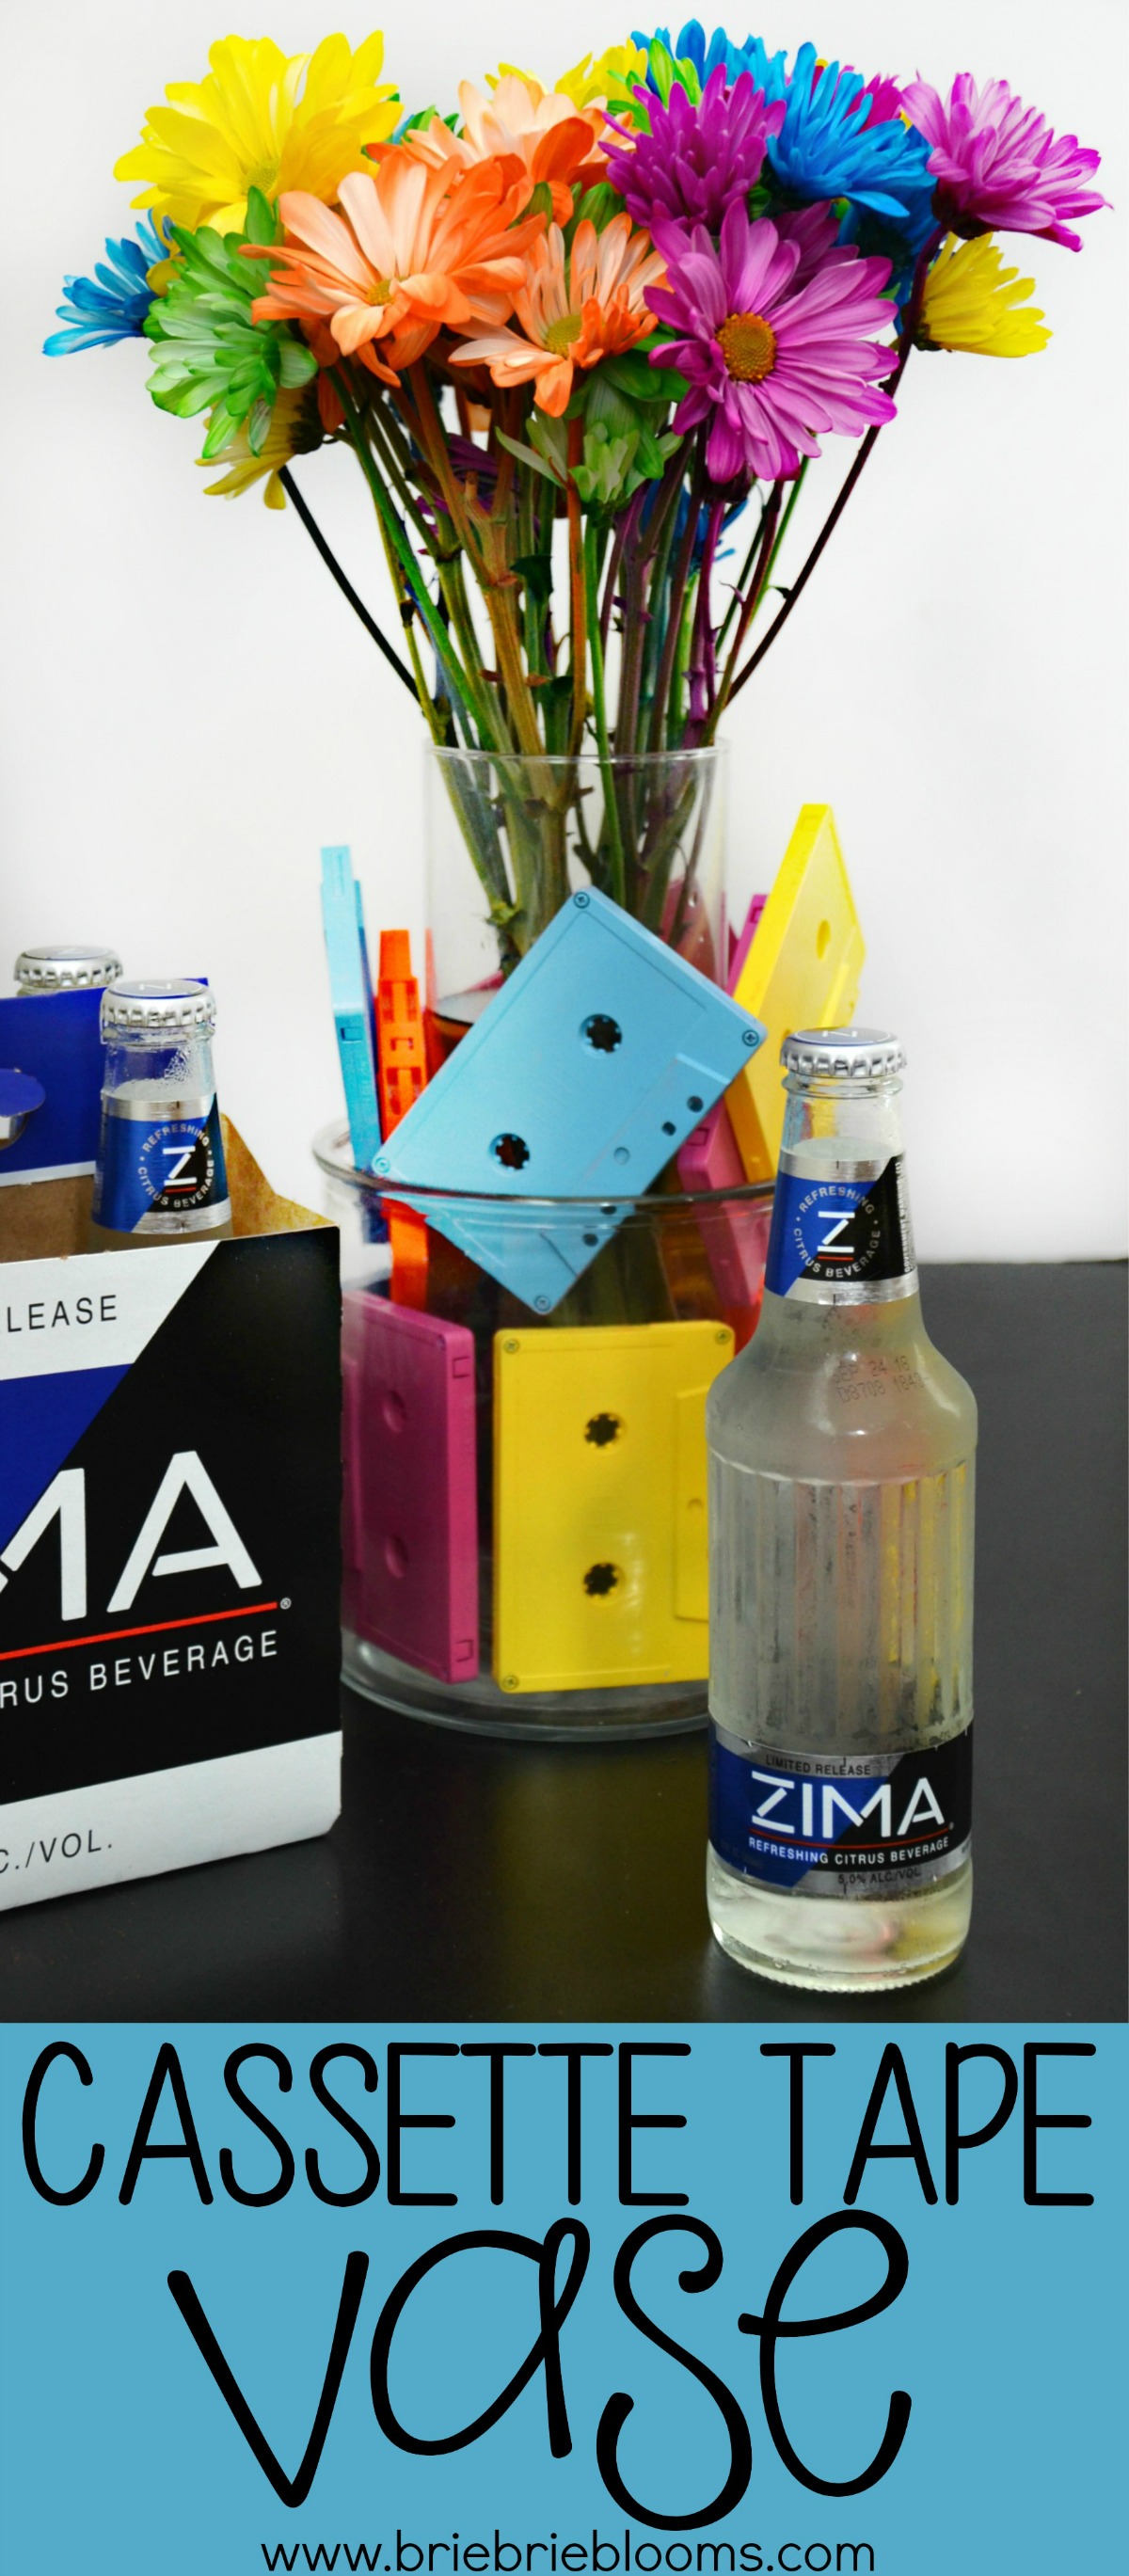 Zima® is back for a limited time and inspired this fun cassette tape vase with bank cassette tapes spray painted in neon colors.